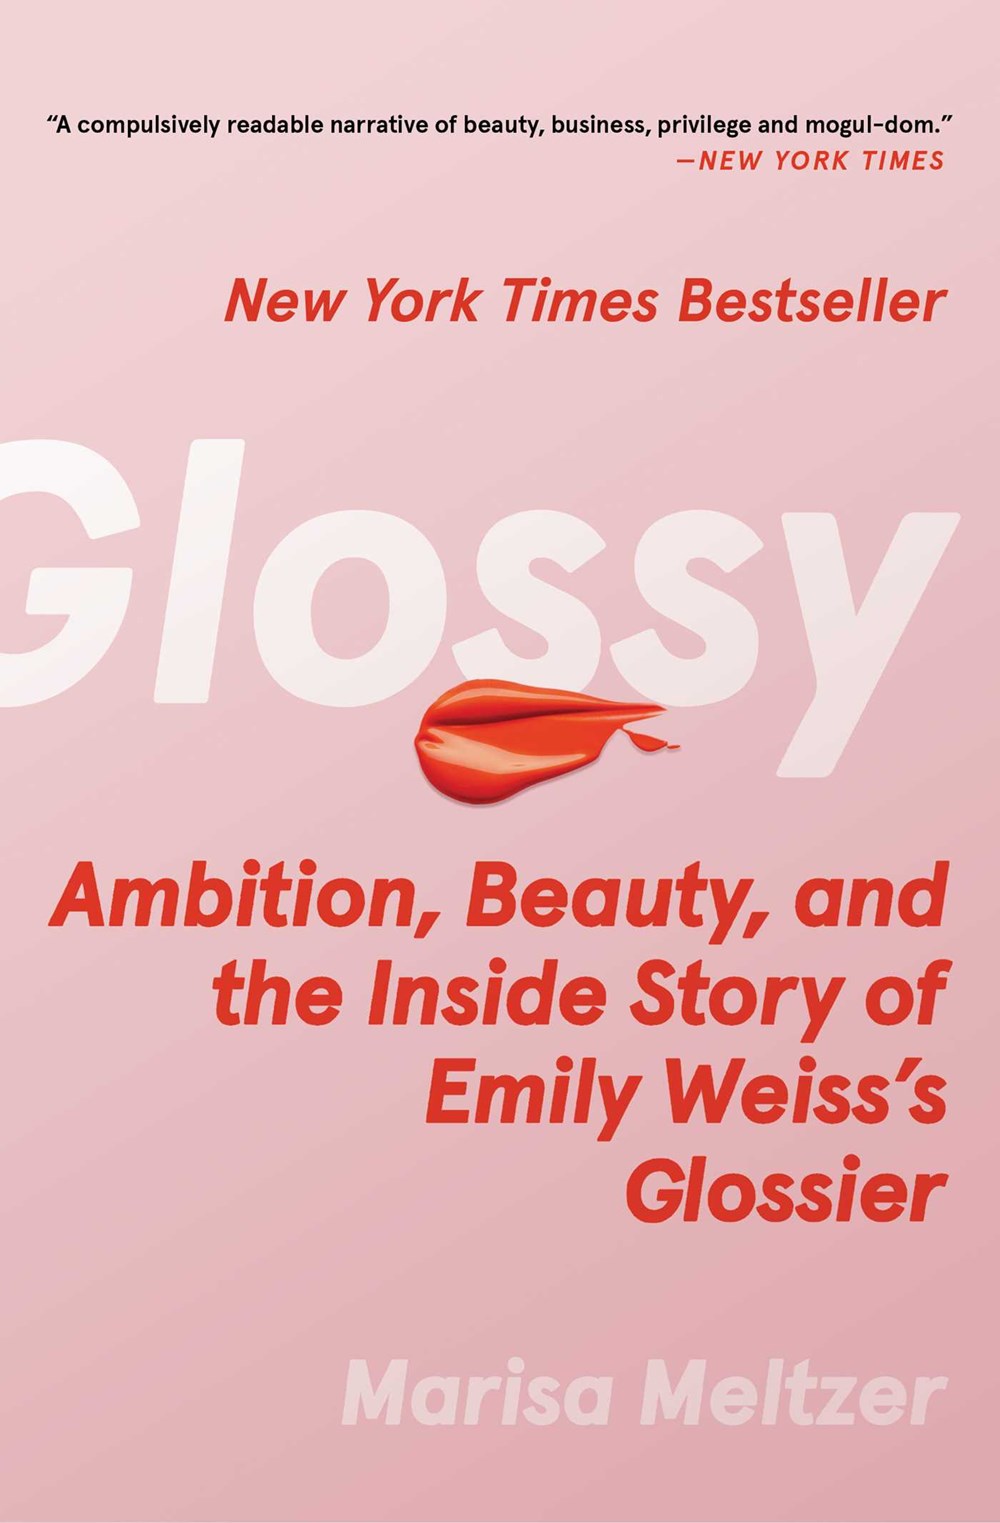 The front cover for Marisa Meltzer's GLOSSY.